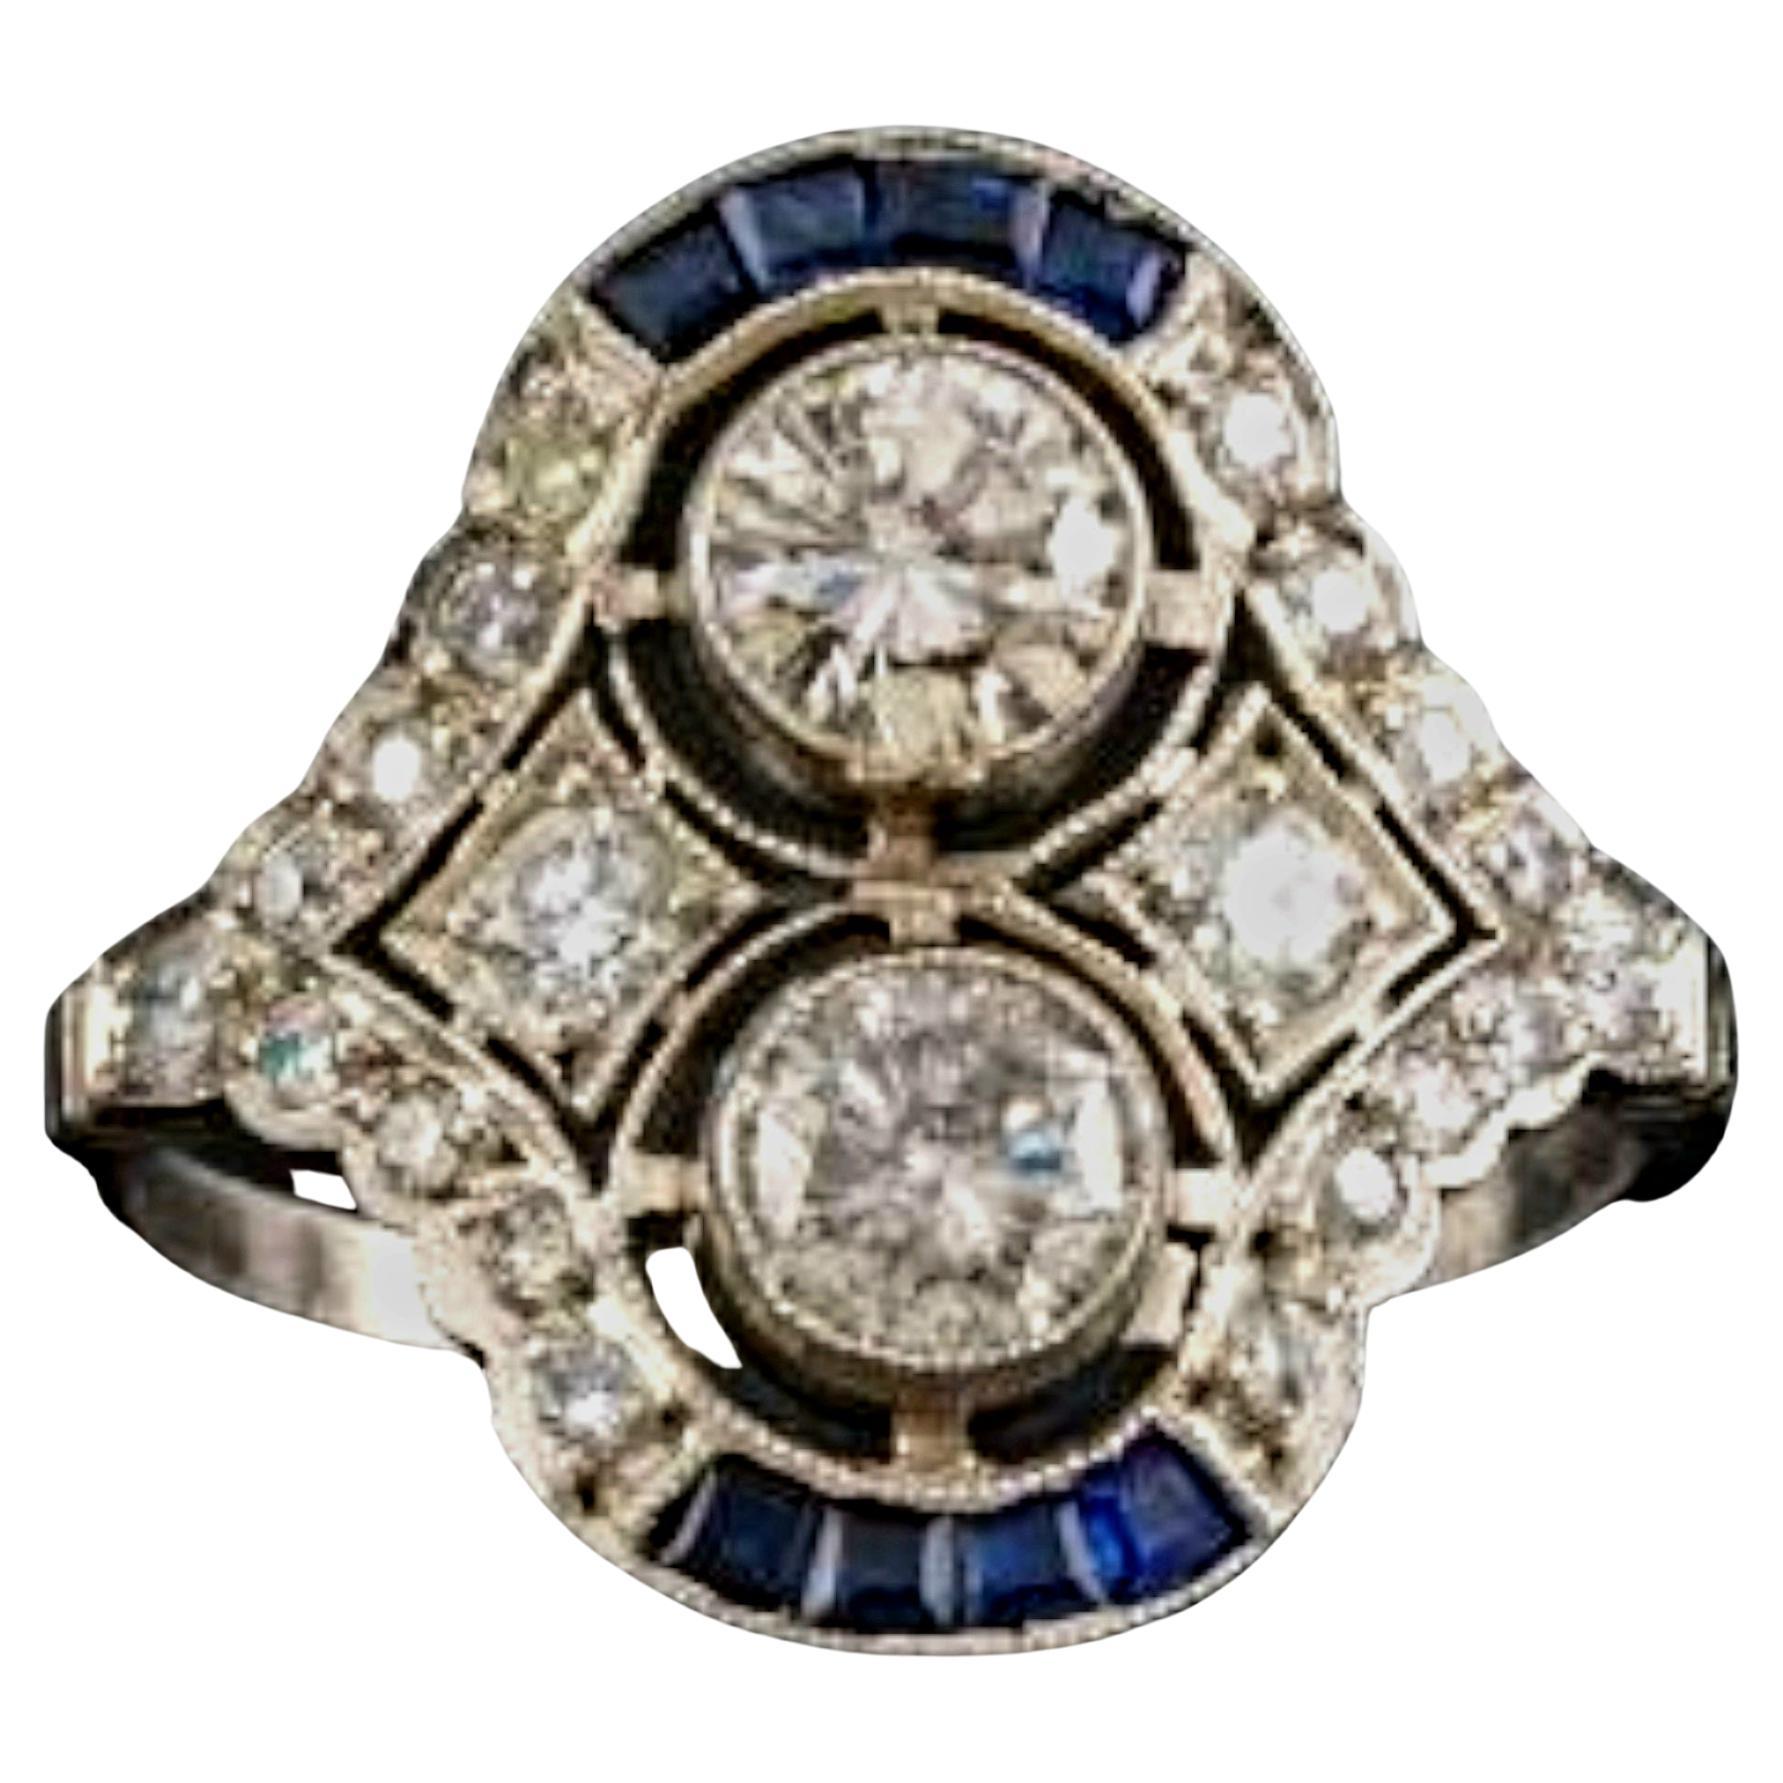 Art-Deco Style Double Diamond and Calibre Sapphire Ring.

A pair of European-cut diamonds, together weighing approx. 1 carat (approx. 0.50 carats each, color I-J, clarity SI), scintillate in tandem, cheek-to-cheek, in this dynamic Art Deco Style